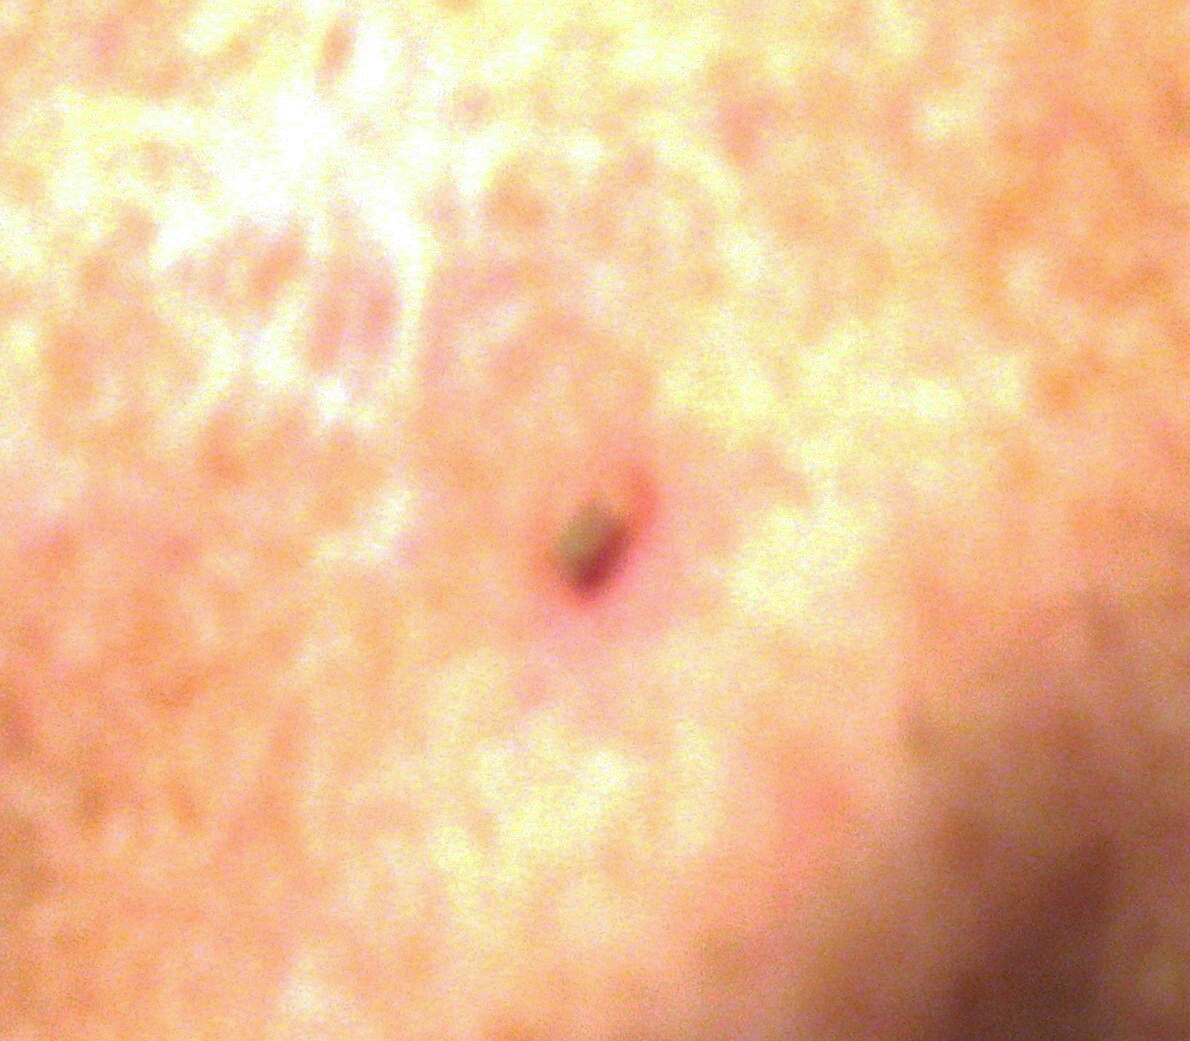 basal cell carcinoma treatment